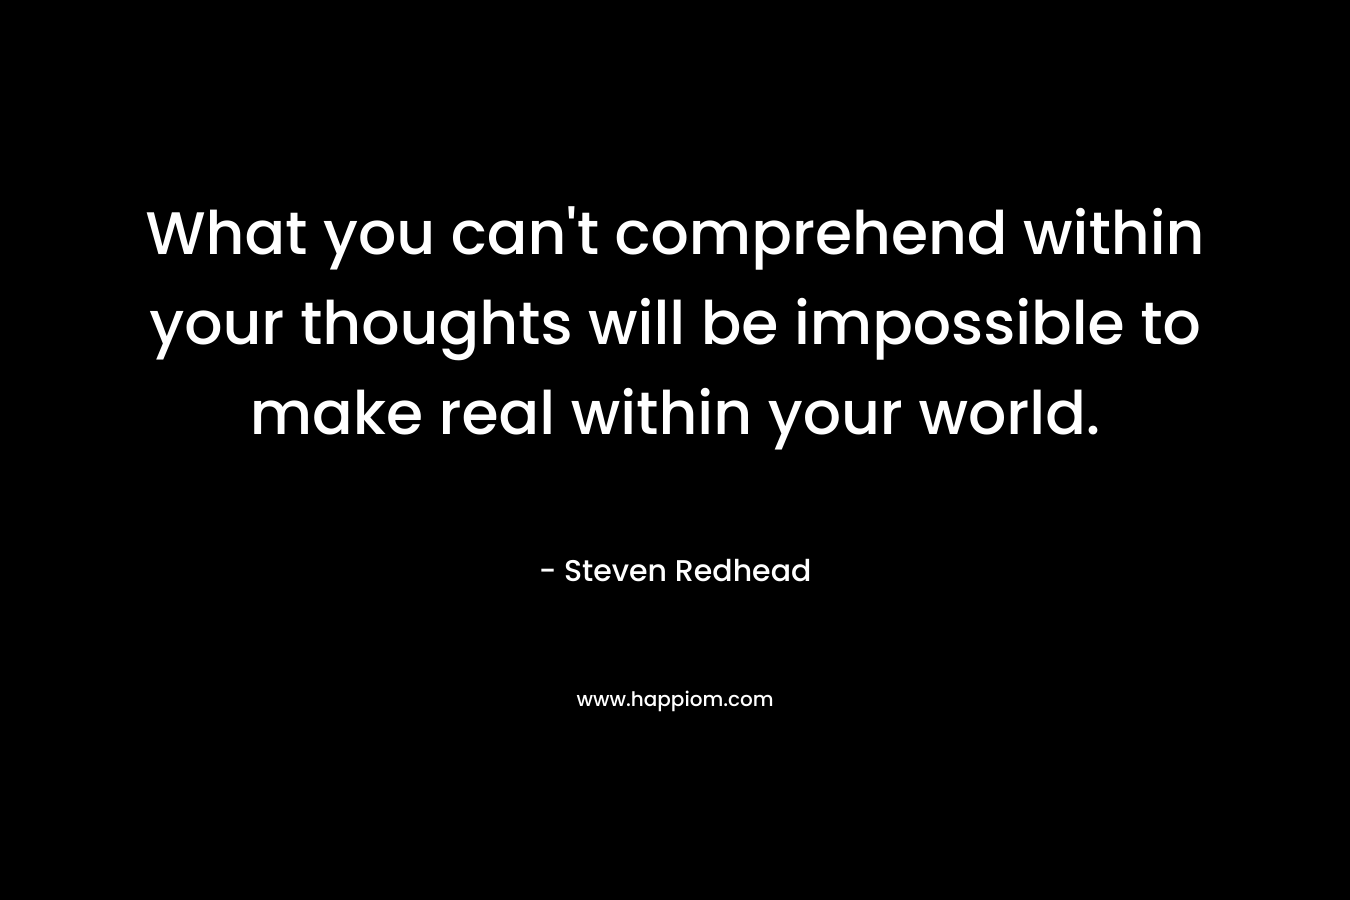 What you can't comprehend within your thoughts will be impossible to make real within your world.